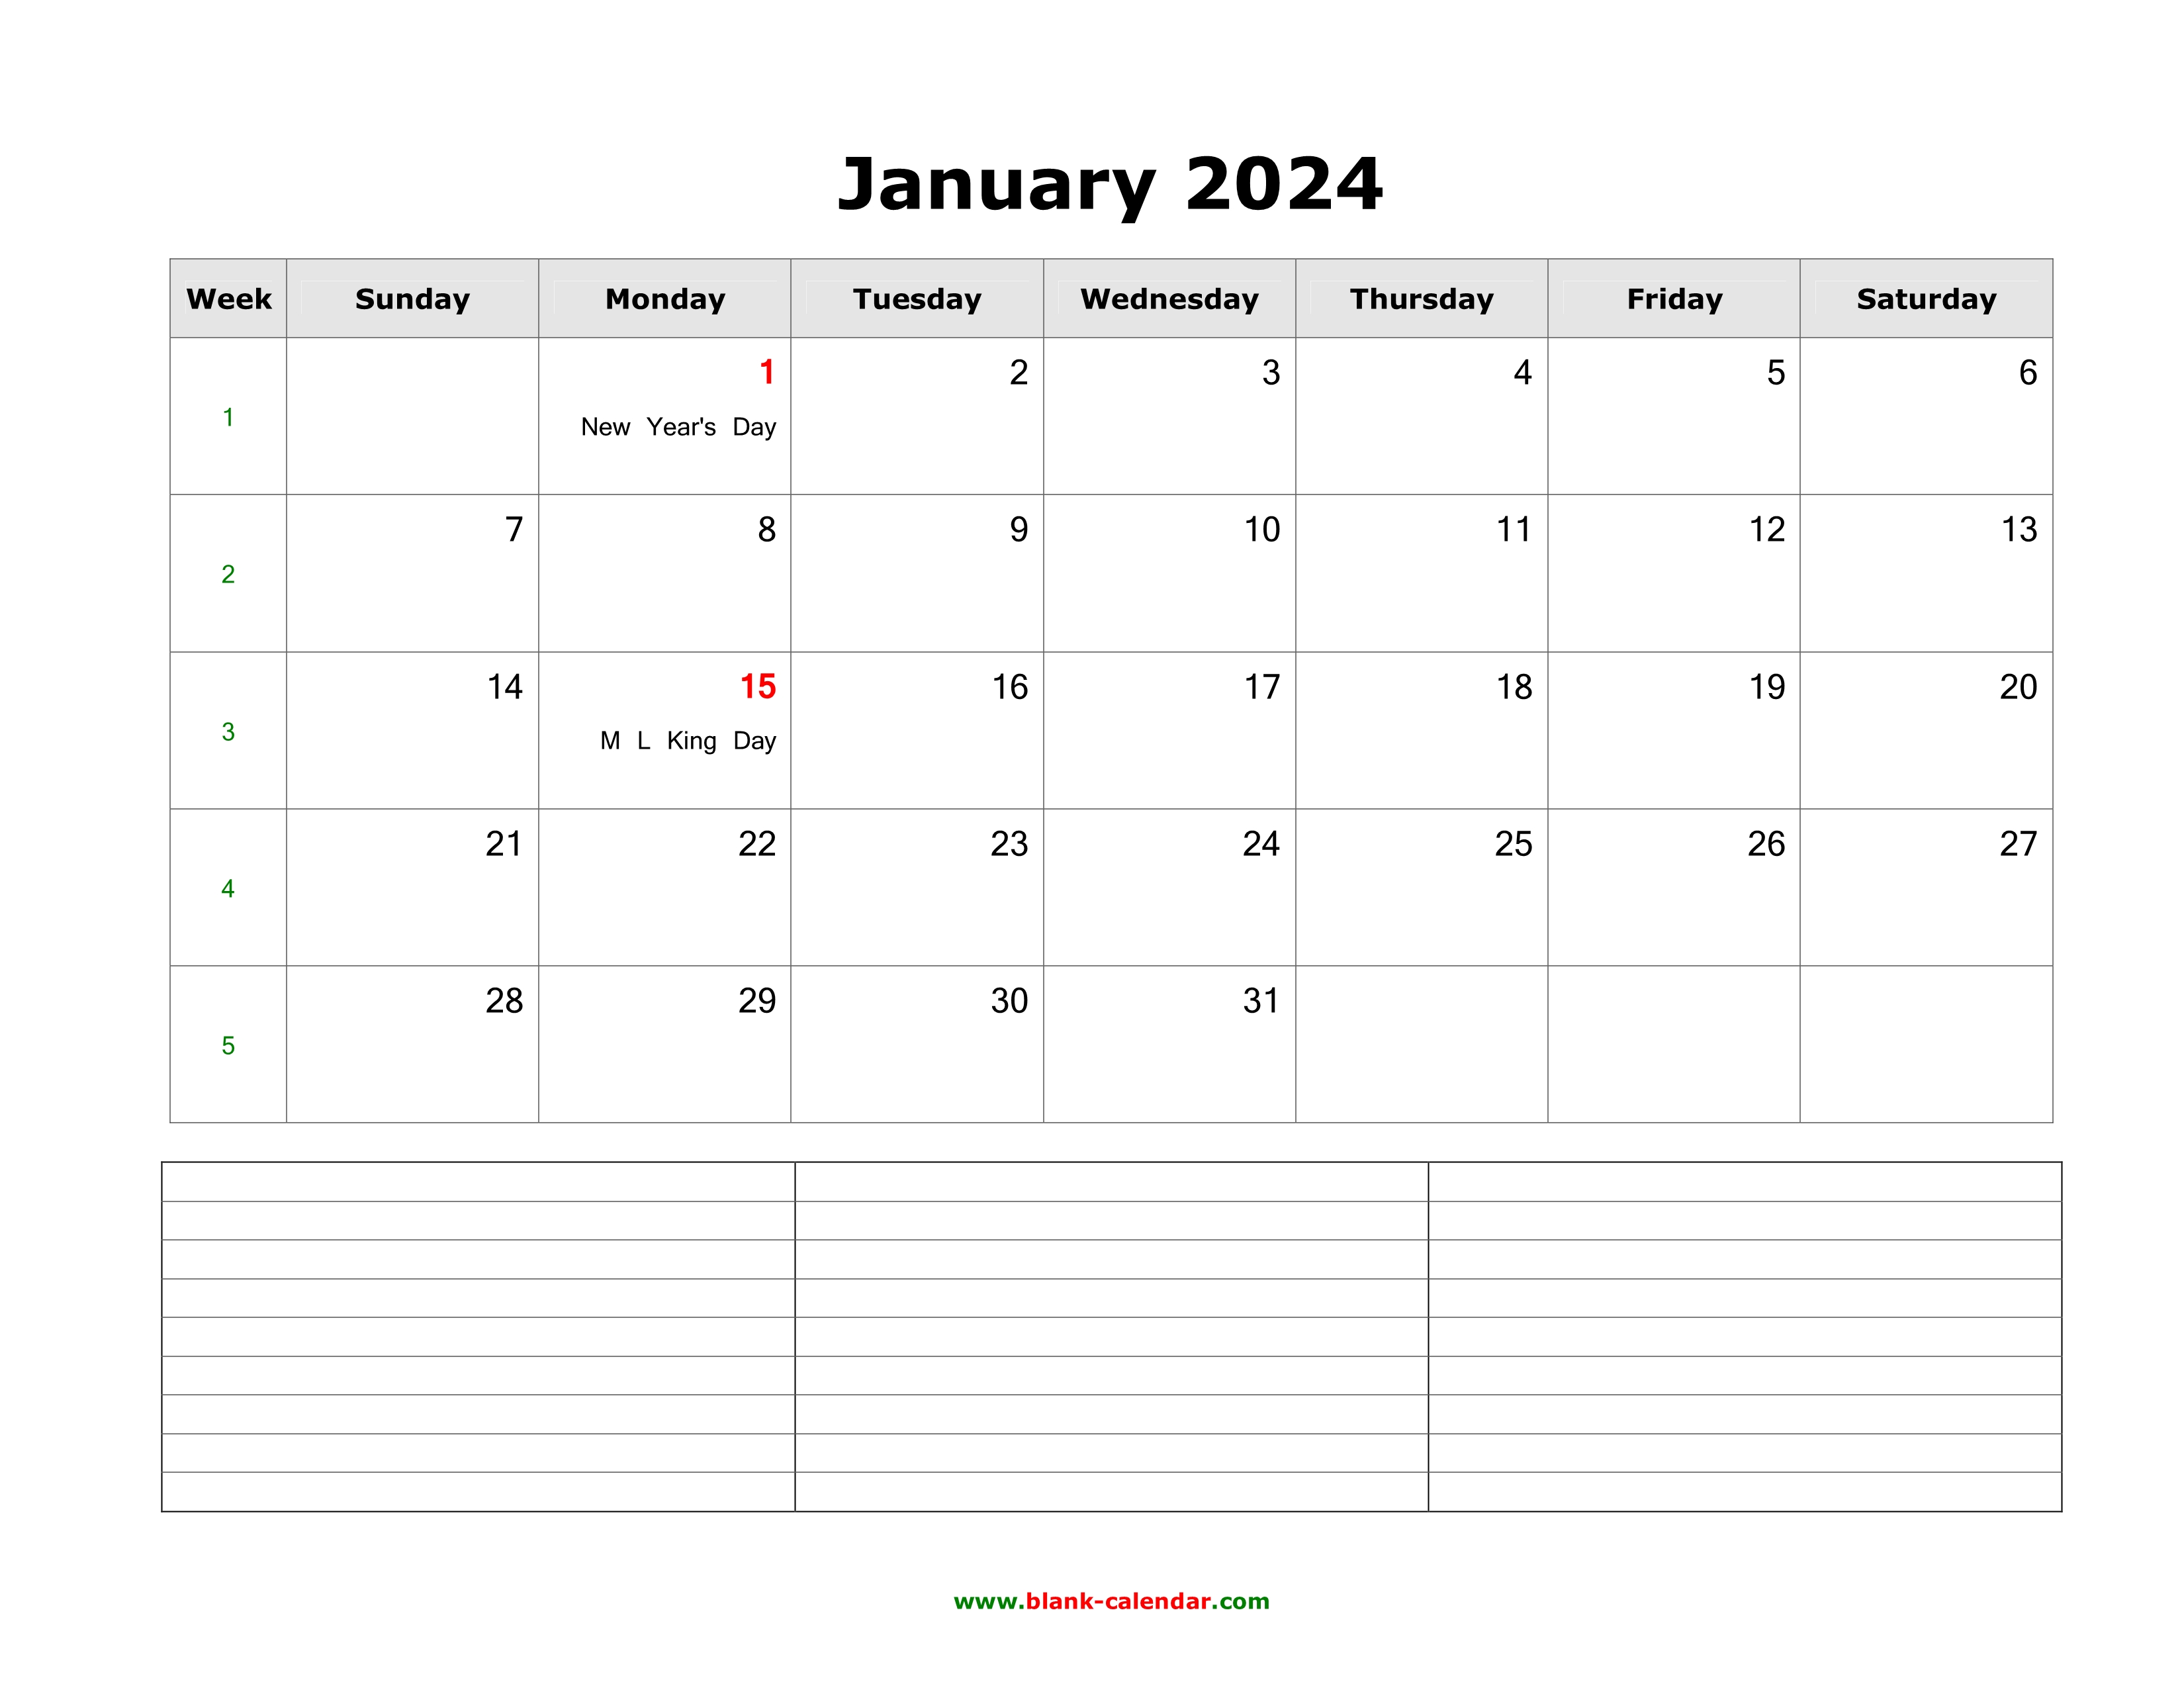 Download January 2024 Blank Calendar with Space for Notes (horizontal)